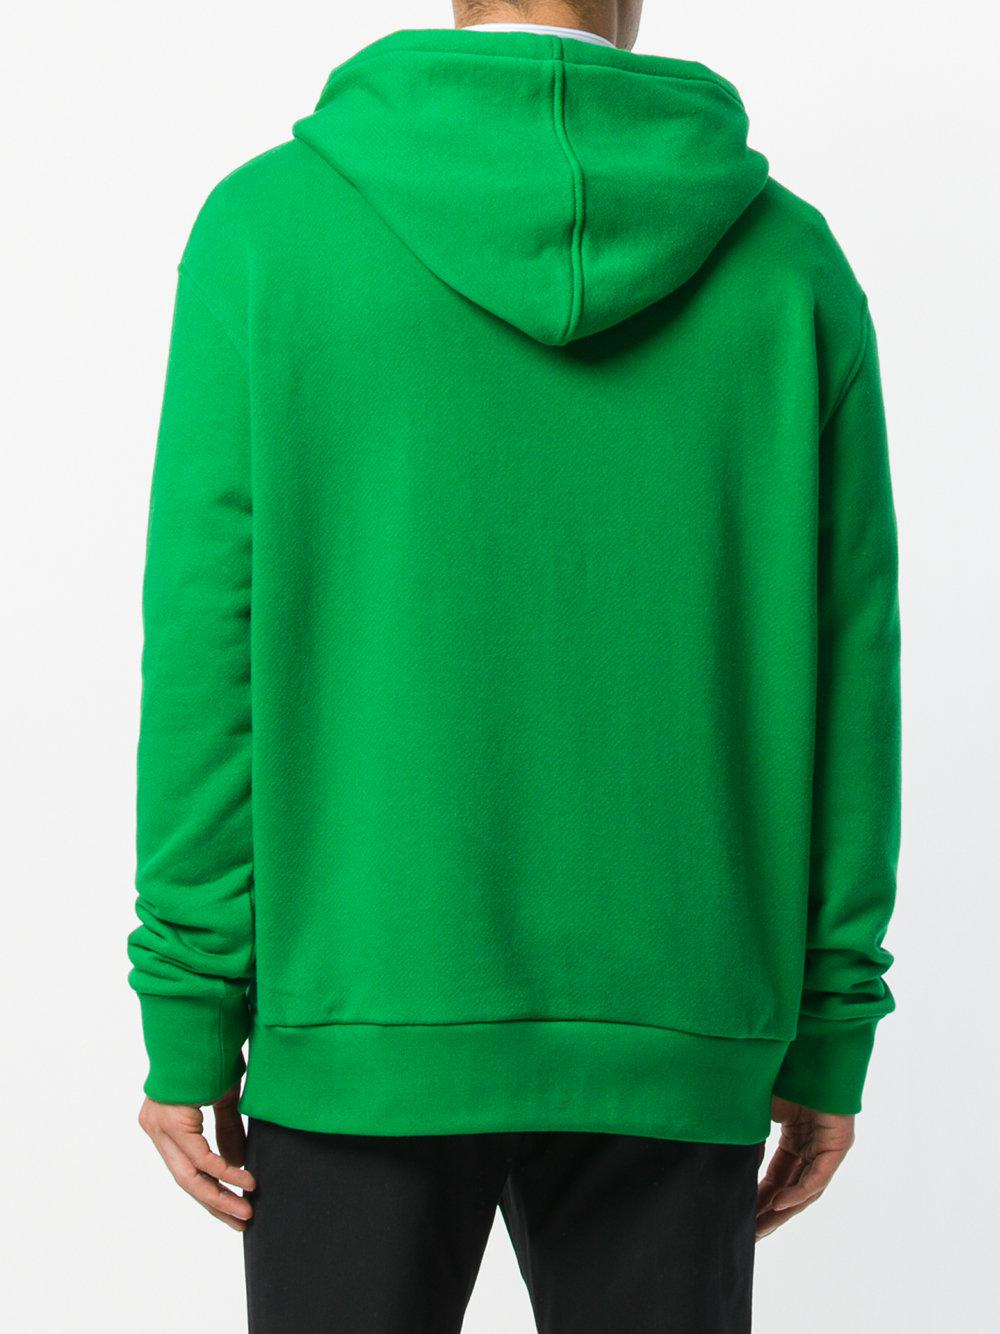 Lyst - Gucci Embroidedered Teddy Bear Hoodie in Green for Men